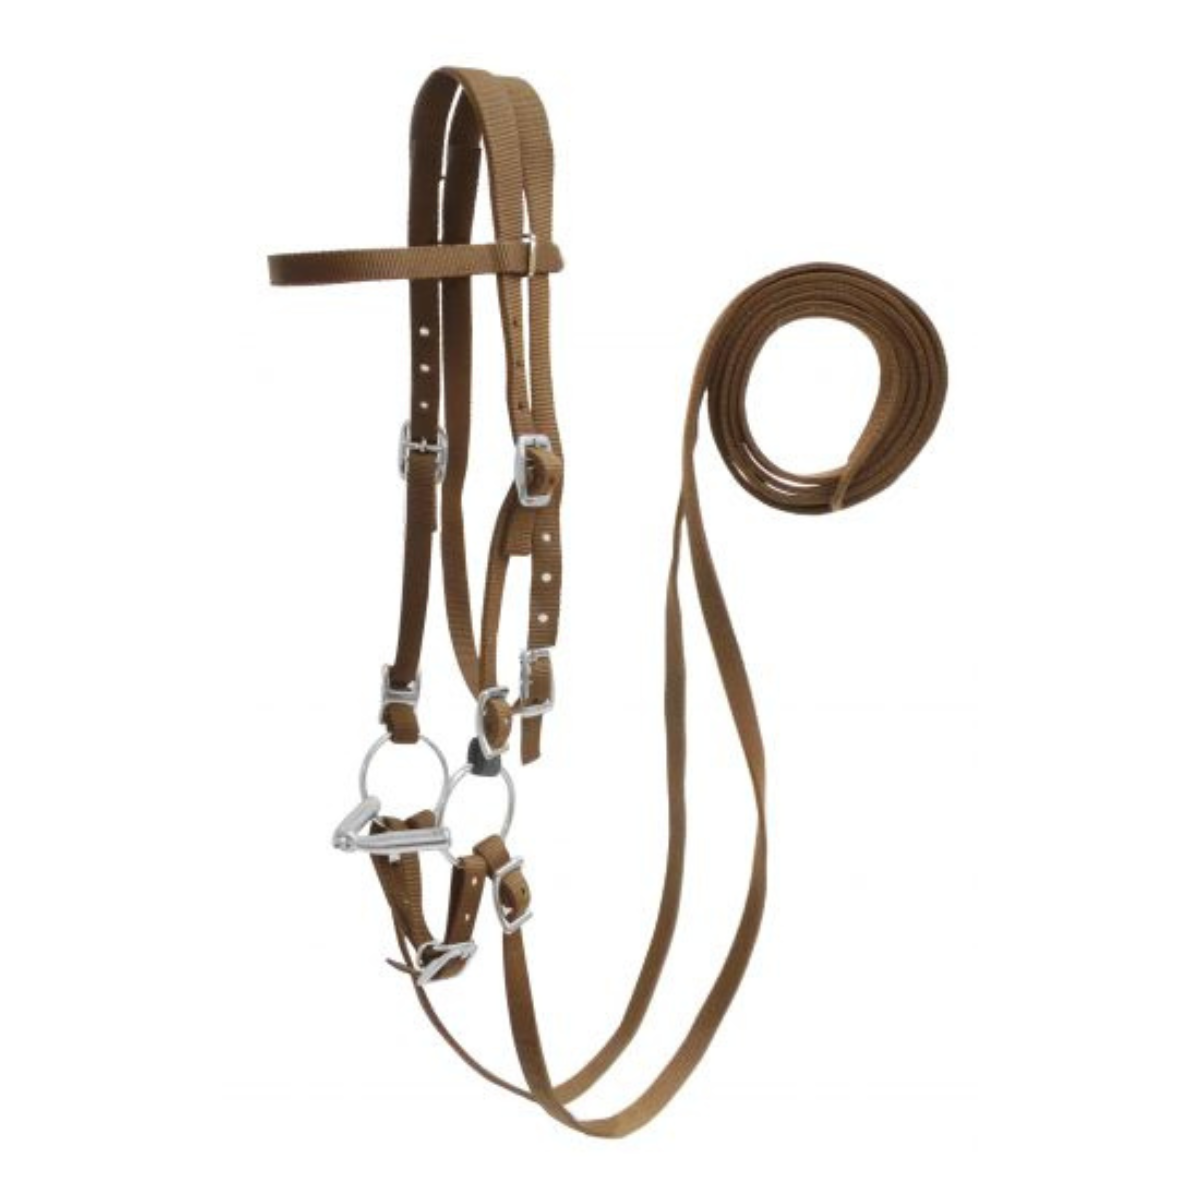 Showman ® Horse Size nylon headstall with snaffle bit. - Double T Saddles